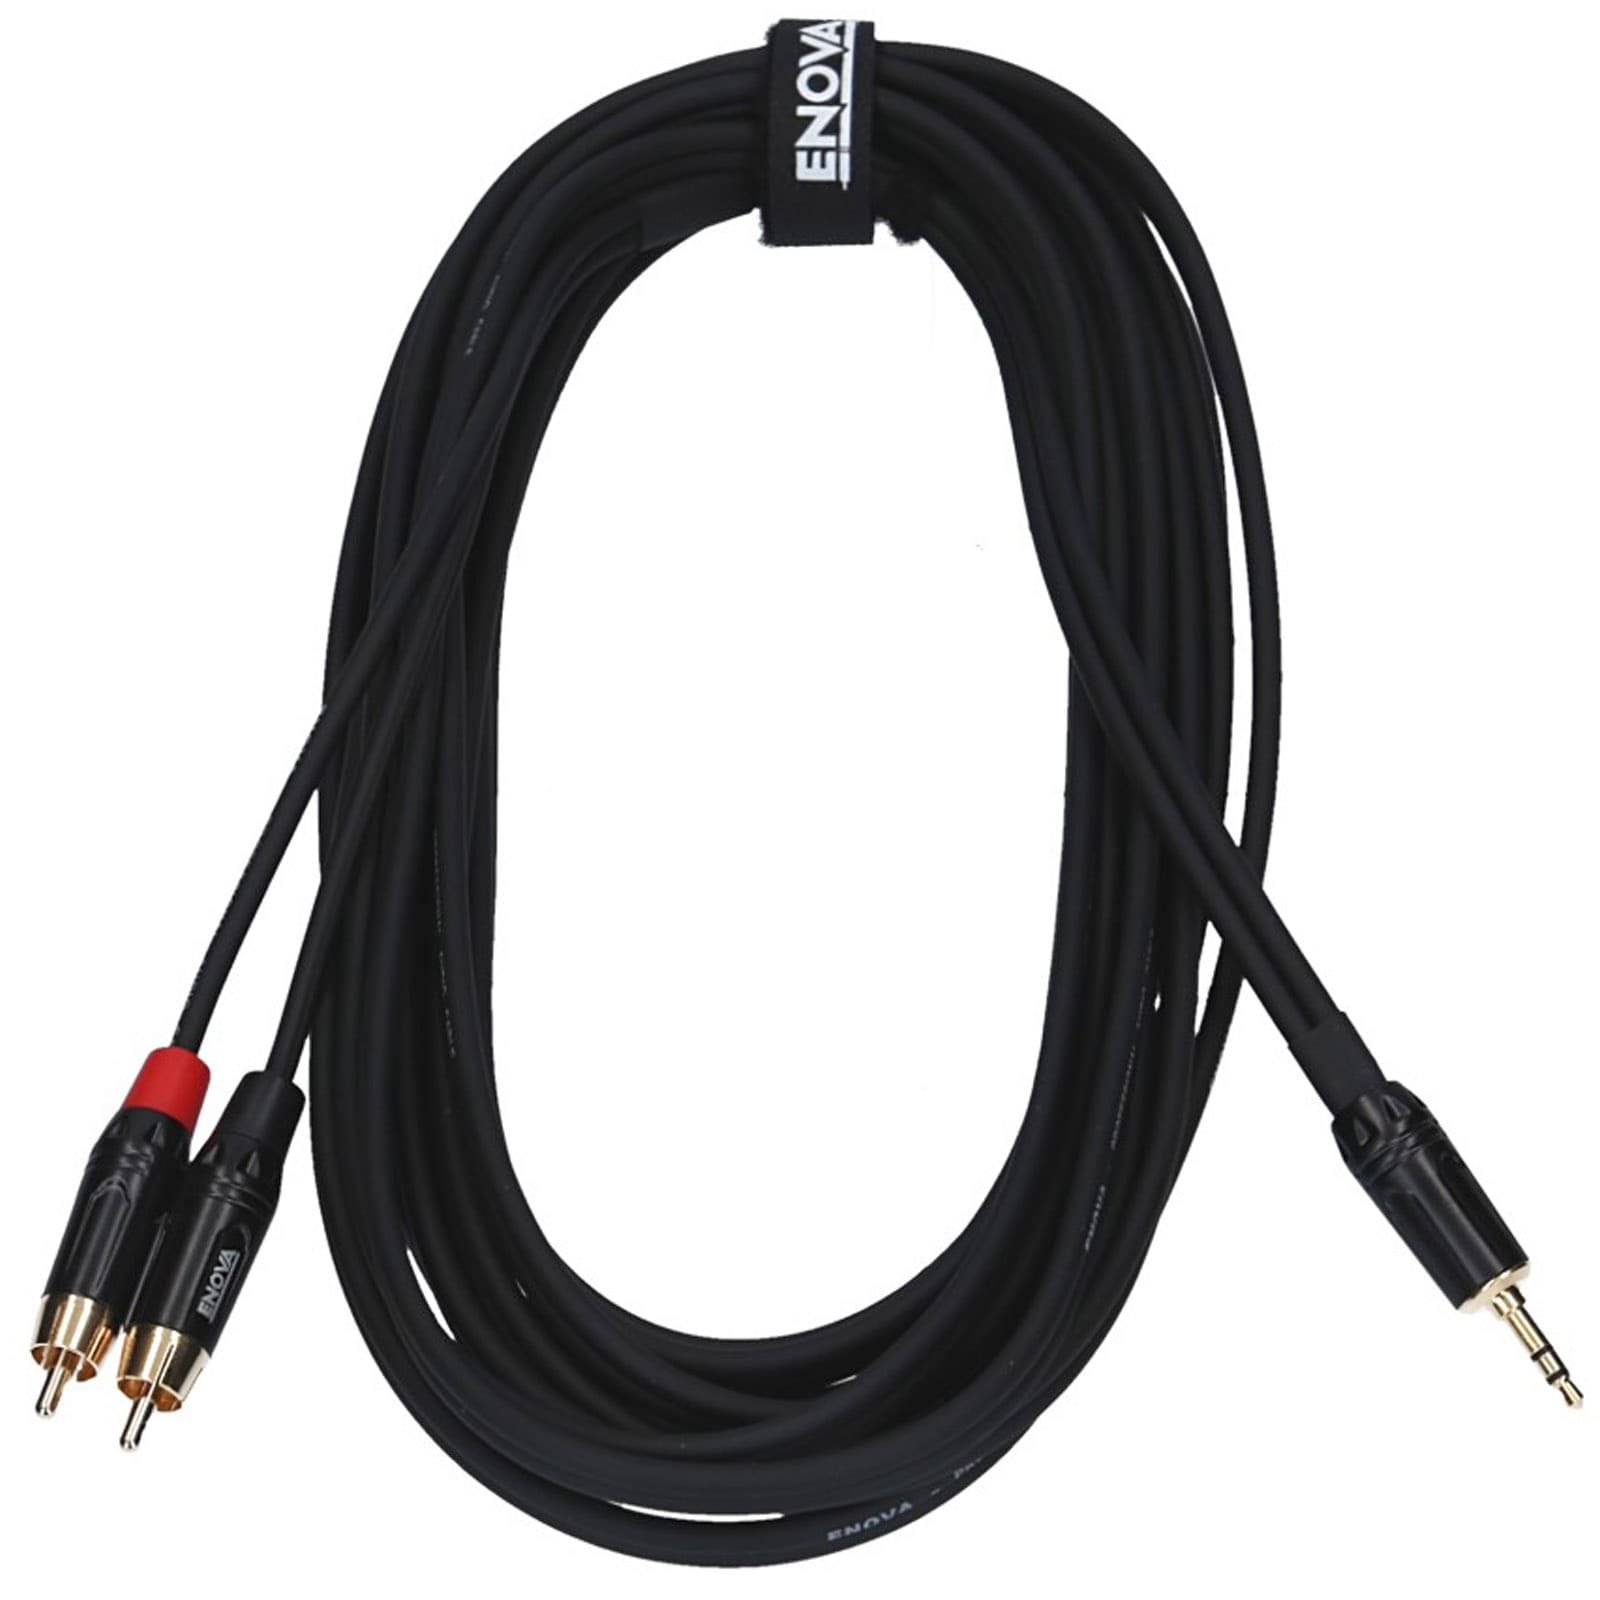 tackle Sightseeing Vilje ENOVA, 3 meter stereo adapter cable, 1x 3.5mm jack stereo to 2x RCA male |  Enova - Pro AV Connectors & Pro AV Interconnect Cables